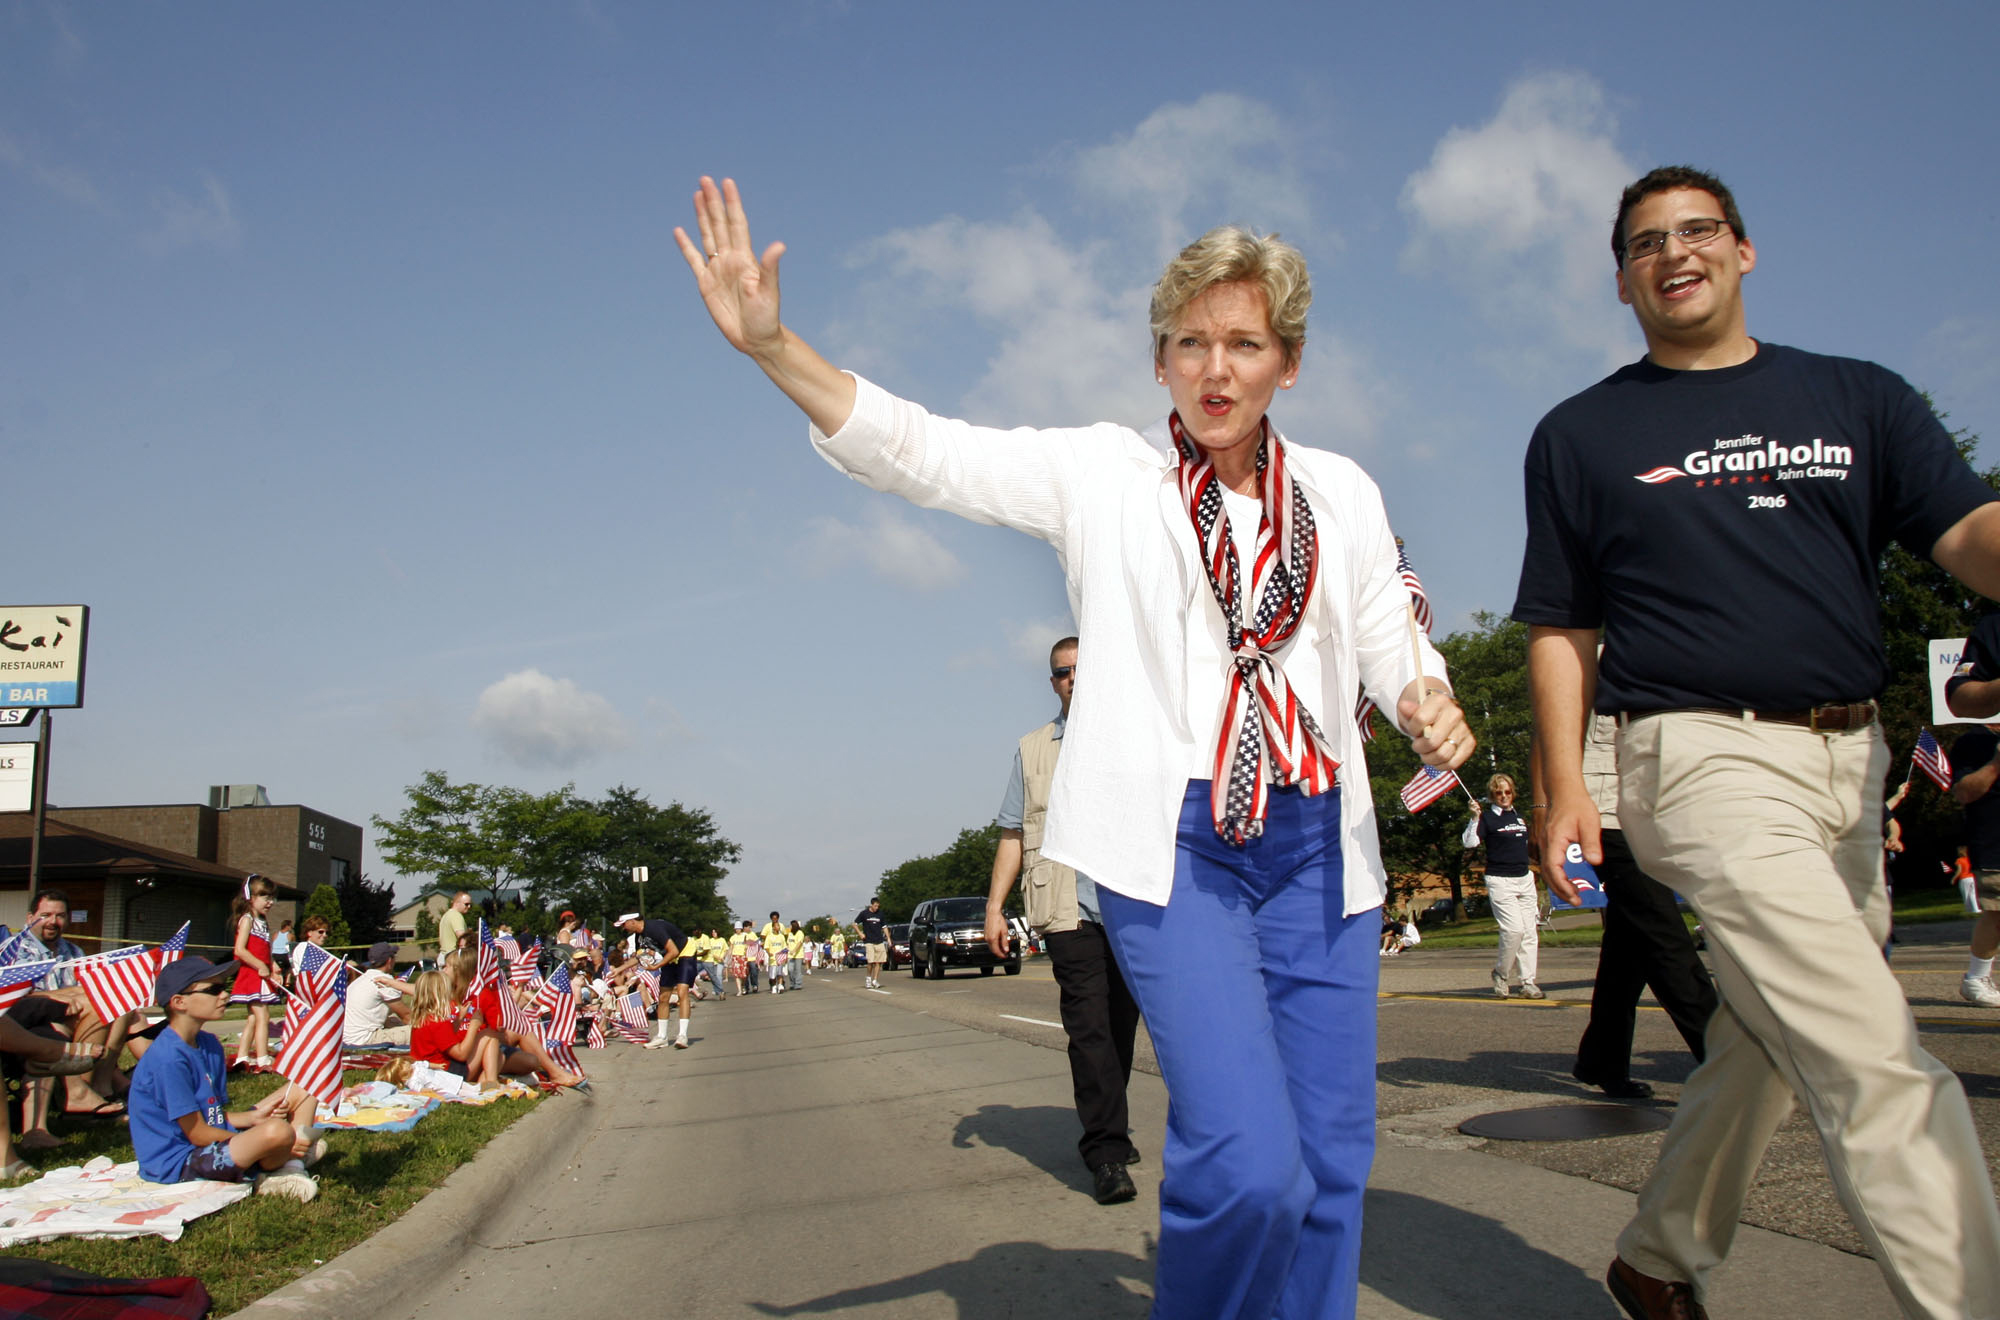 At a 2006 Fourth of July parade in Clawson, Mich., then-Gov. Jennifer Granholm marches with County Commissioner Dave Woodward.